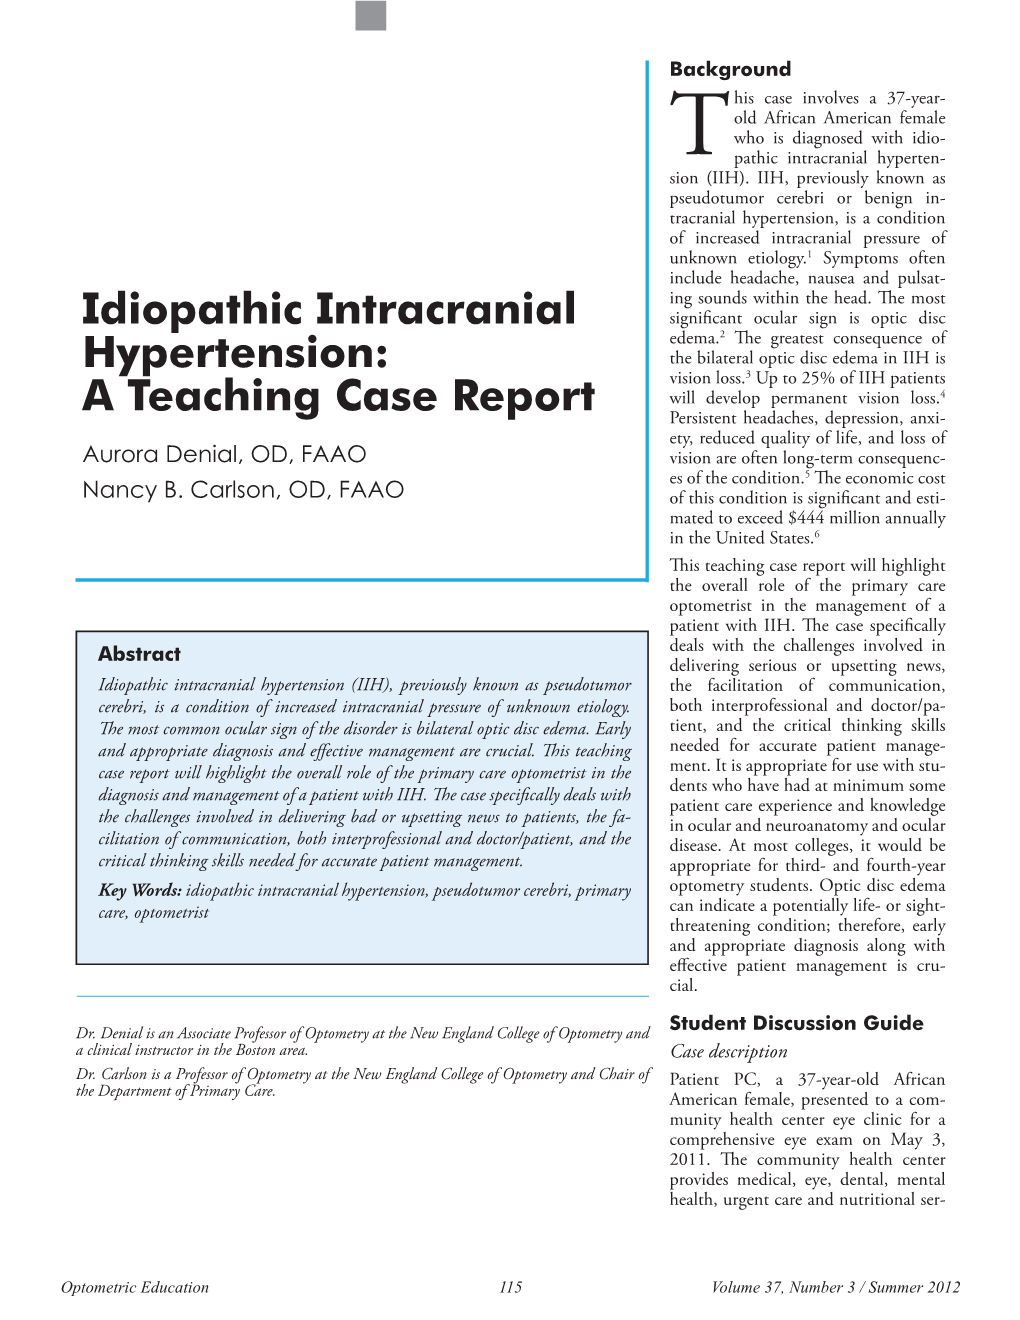 Idiopathic Intracranial Hypertension: a Teaching Case Report